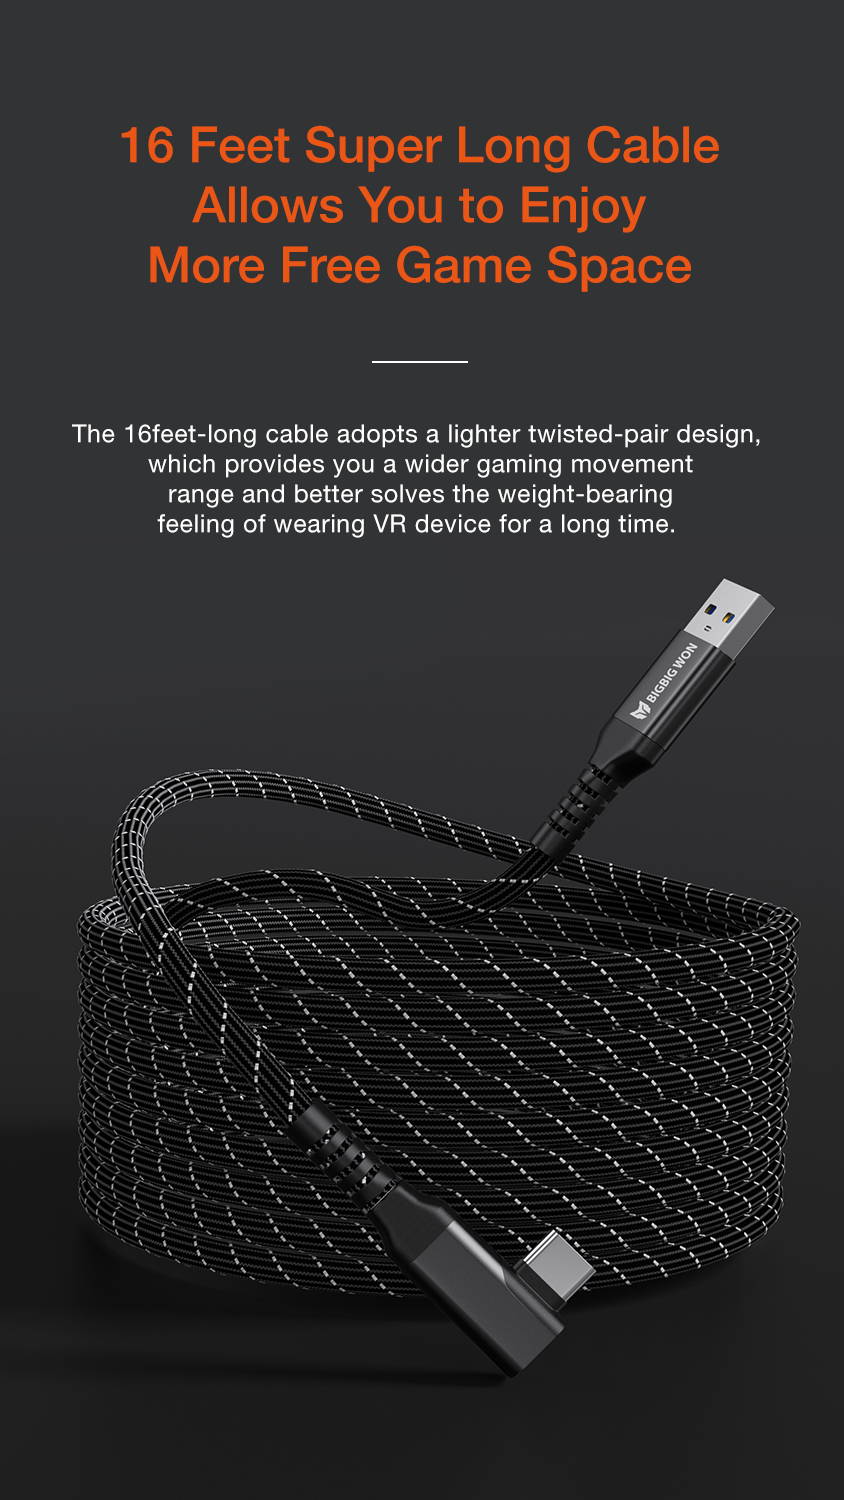 bigbig won usb 3.2 usb c type c link cable 16 feet super long cable